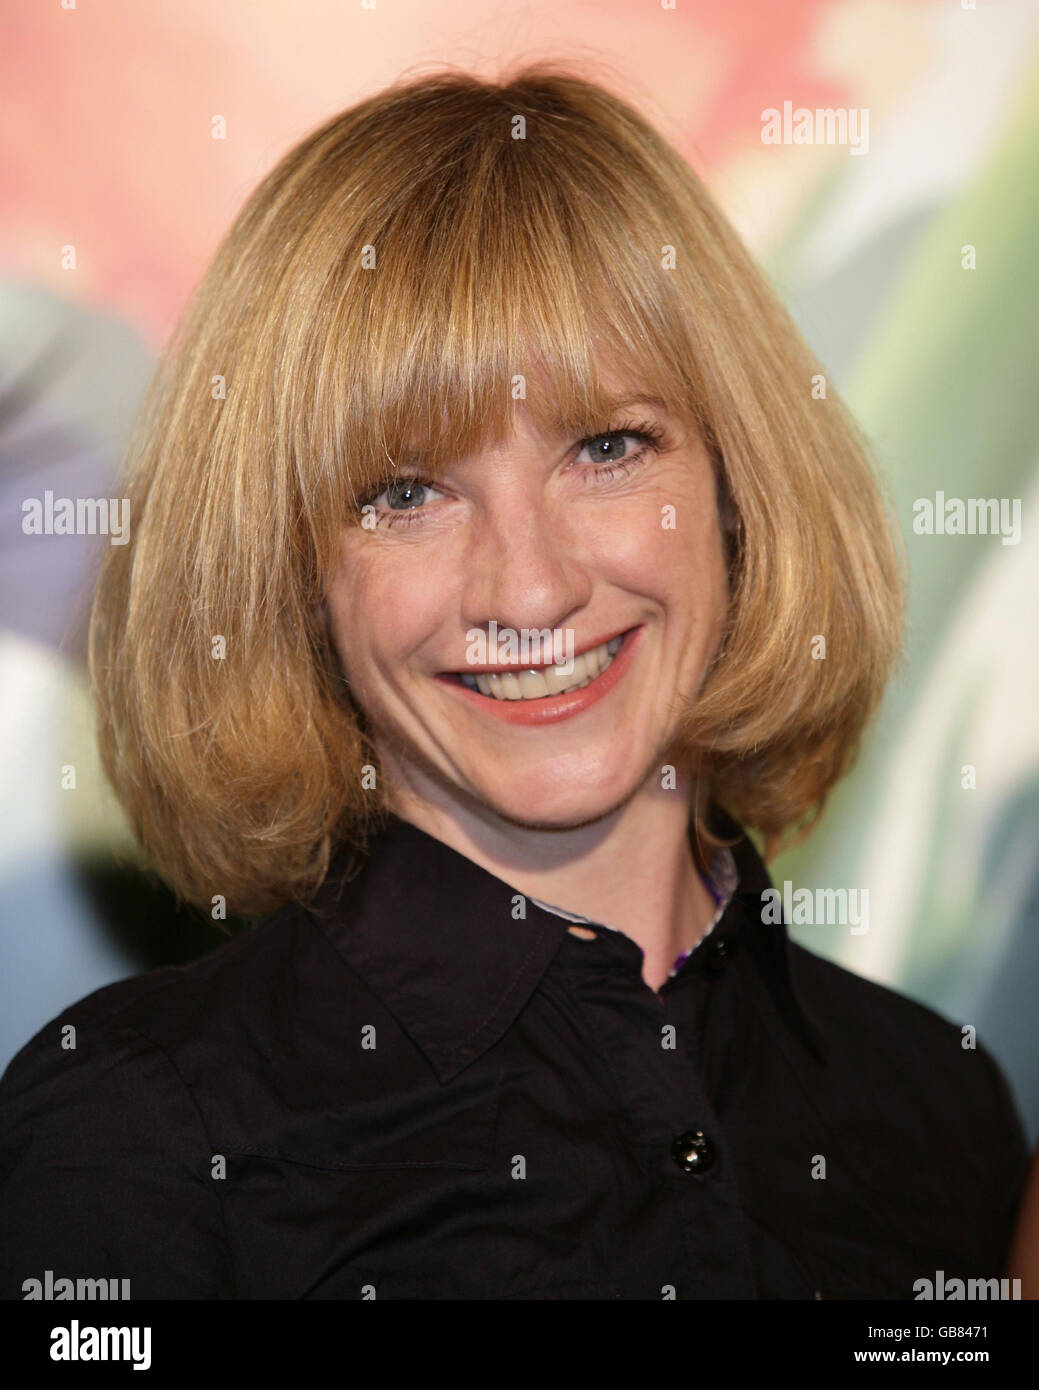 Jane Horrocks, who provides the voice of the character Fairy Mary in the film, at the UK premiere of the Disney animated movie 'Tinker Bell', at Dartmouth House in central London, Sunday 2 November 2008. Stock Photo